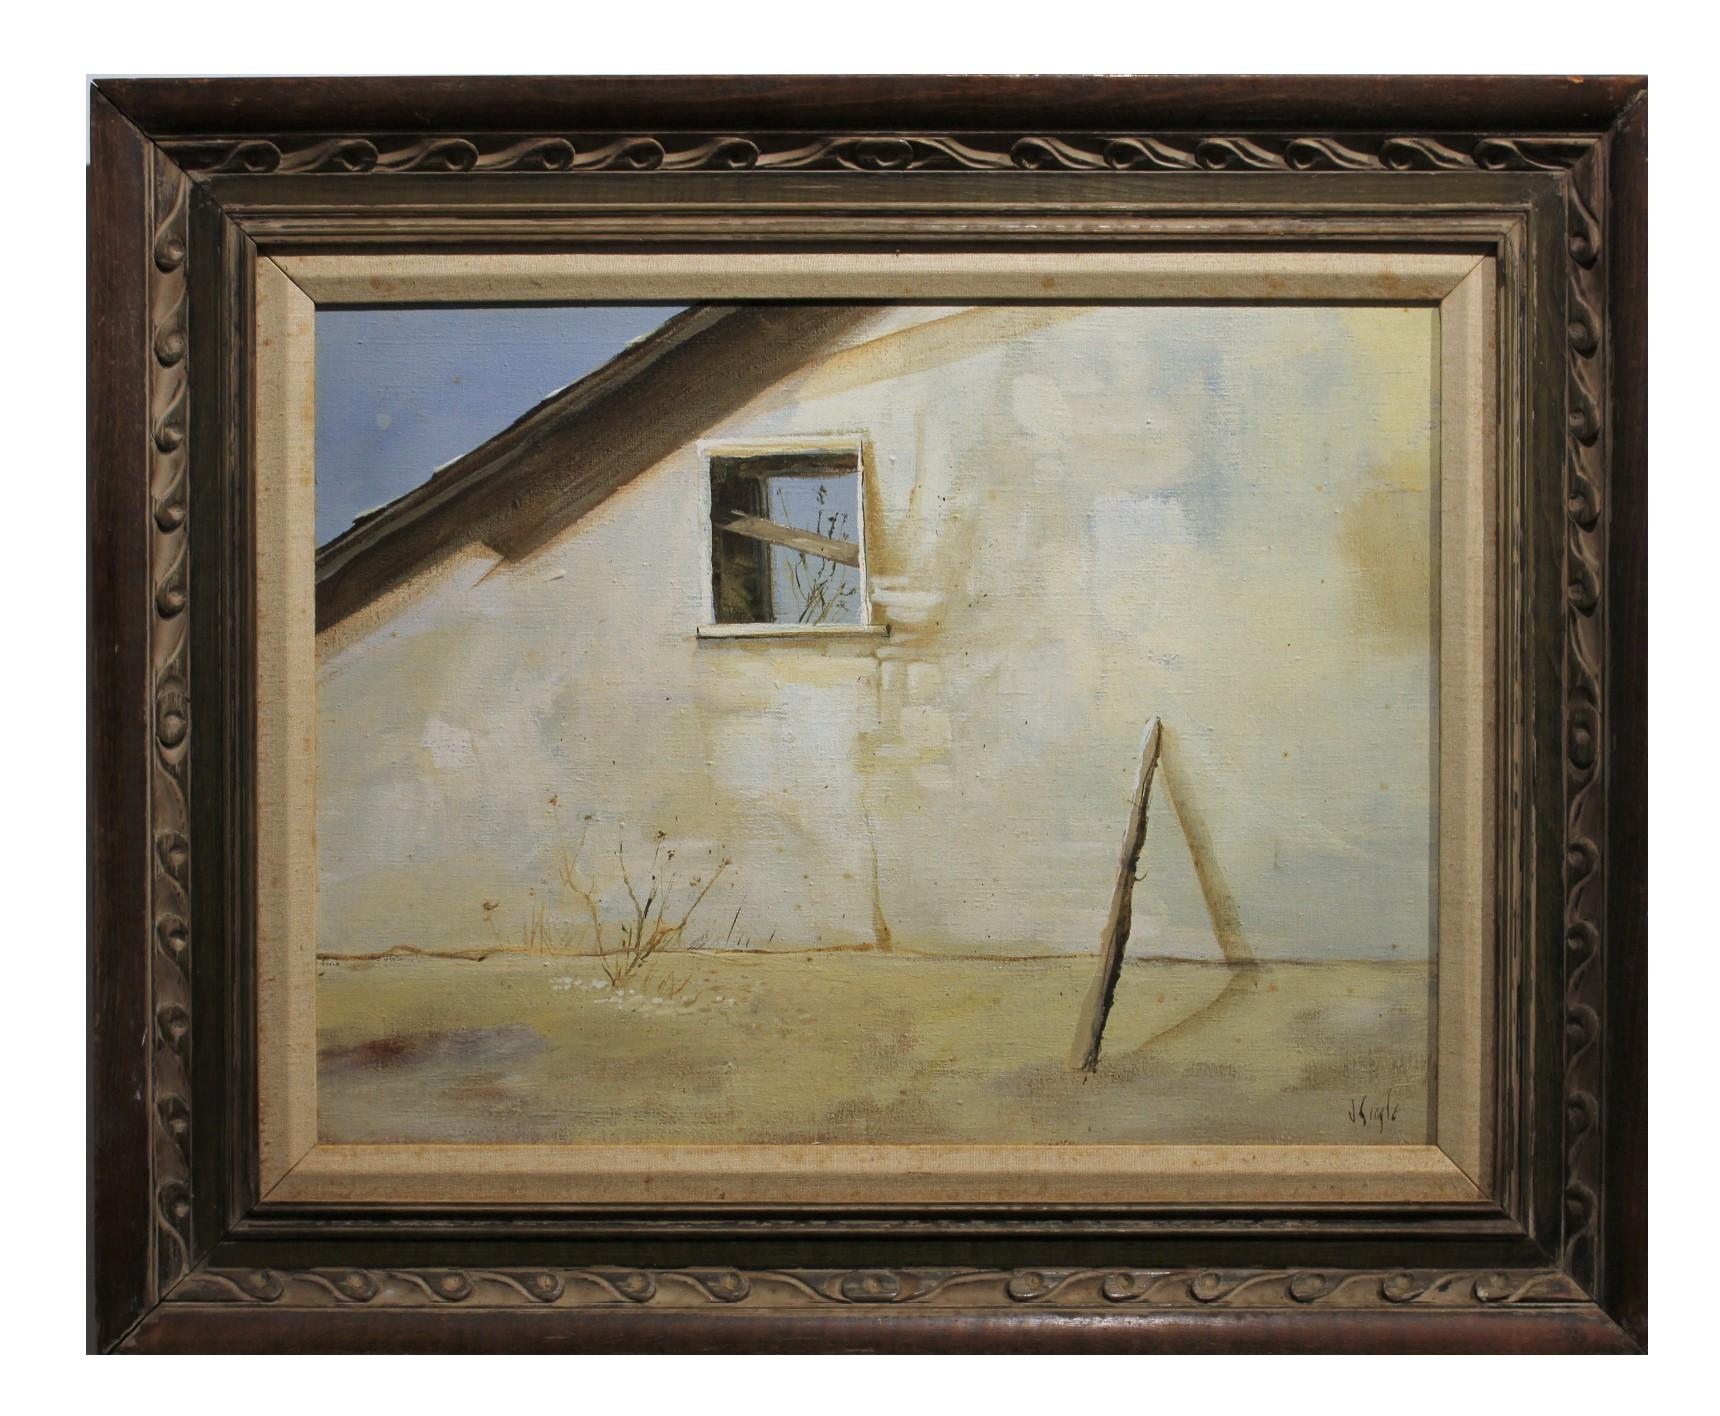 Jerry V. Seagle Figurative Painting - "A Day of Yesterday" Architectural Minimal Painting